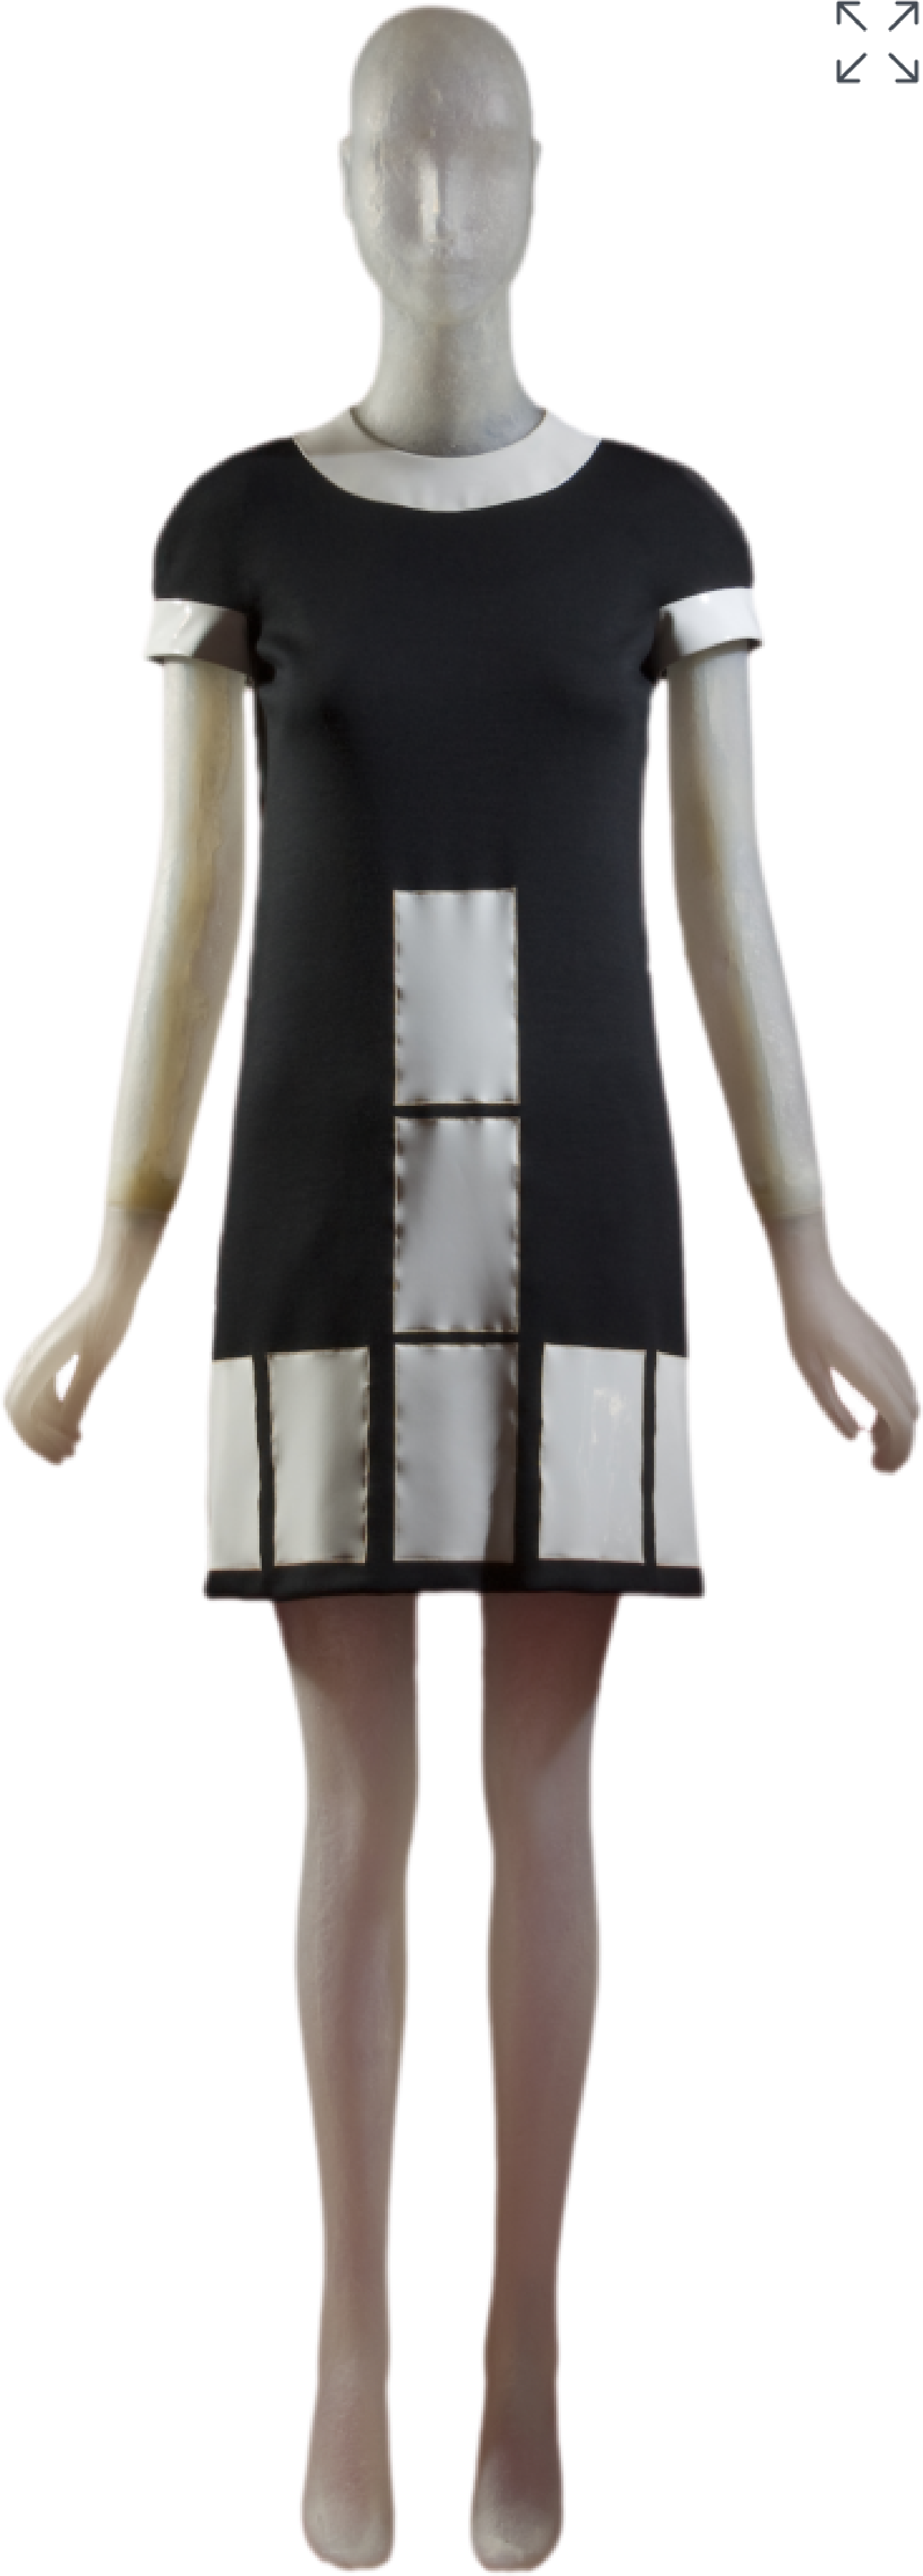 Front view of a 1969 Pierrie Cardin short sleeve black wool mini-dress with rectangular cutouts at the dress hem and center front, revelaing white vinyl rectangles. The hems of the sleeves and collar are finished with white vinyl strips. 